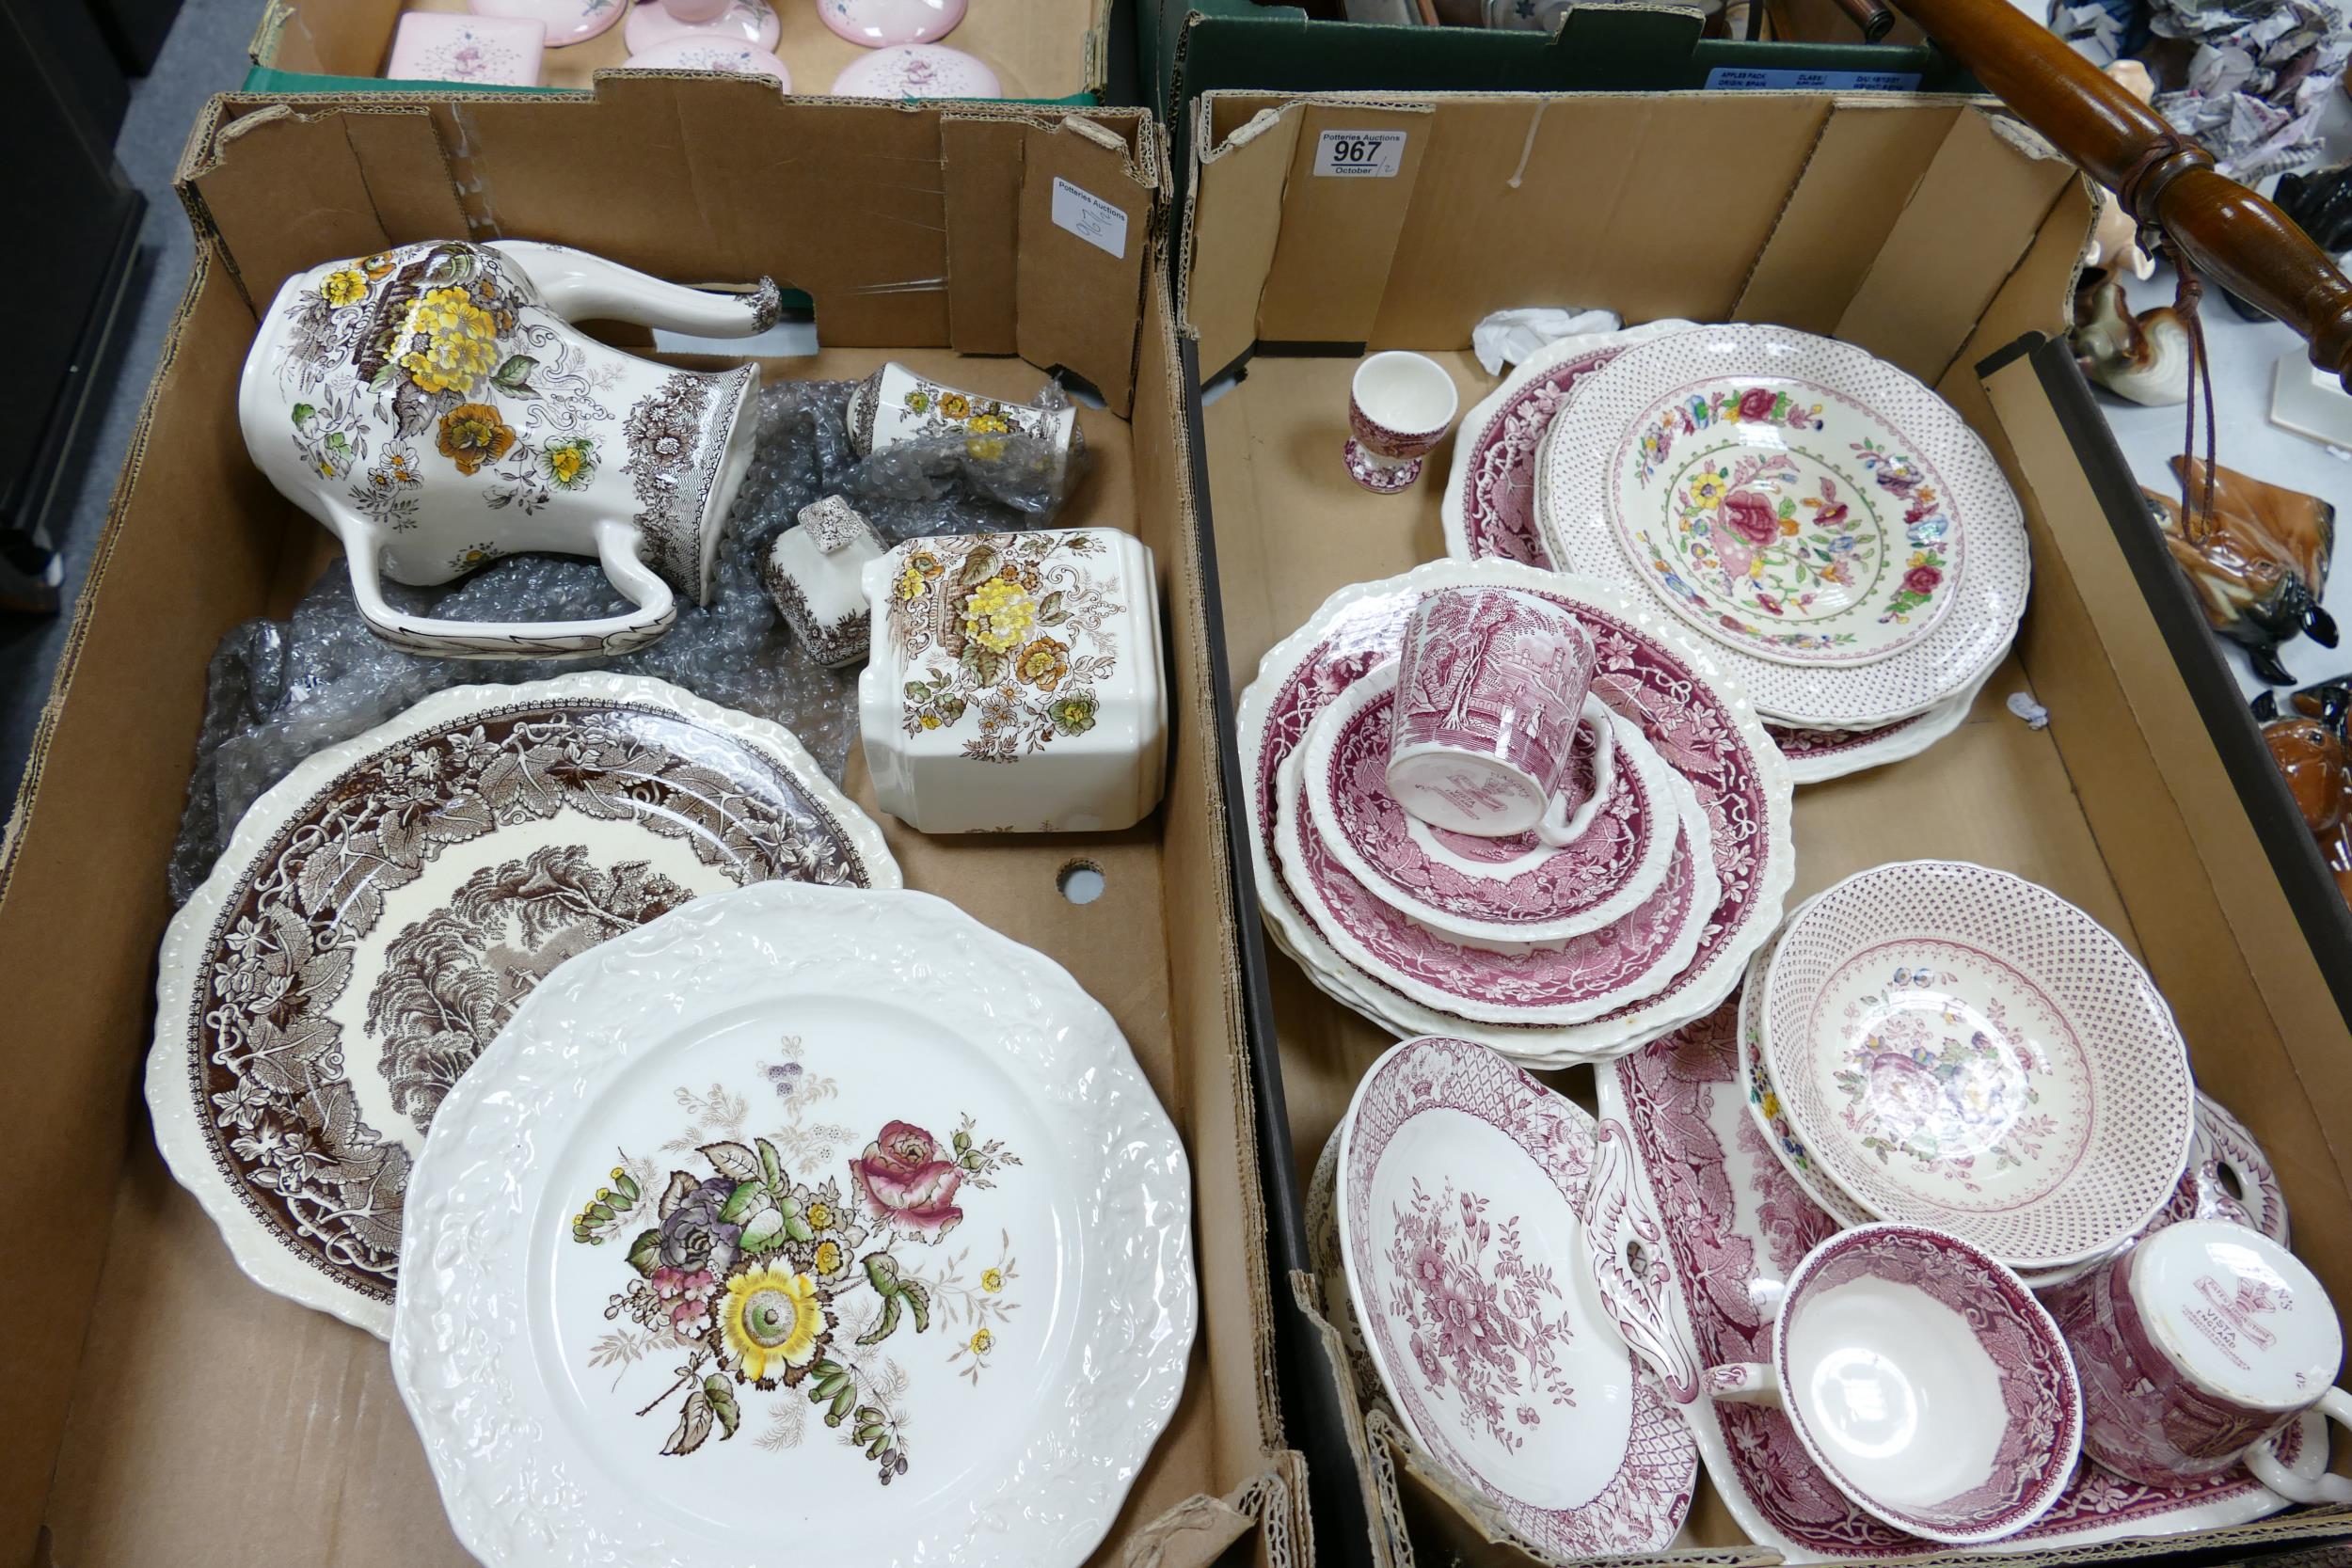 A mixed collection of Masons pottery items in Stratford, Friarswood & Ascot patterns(2 trays)